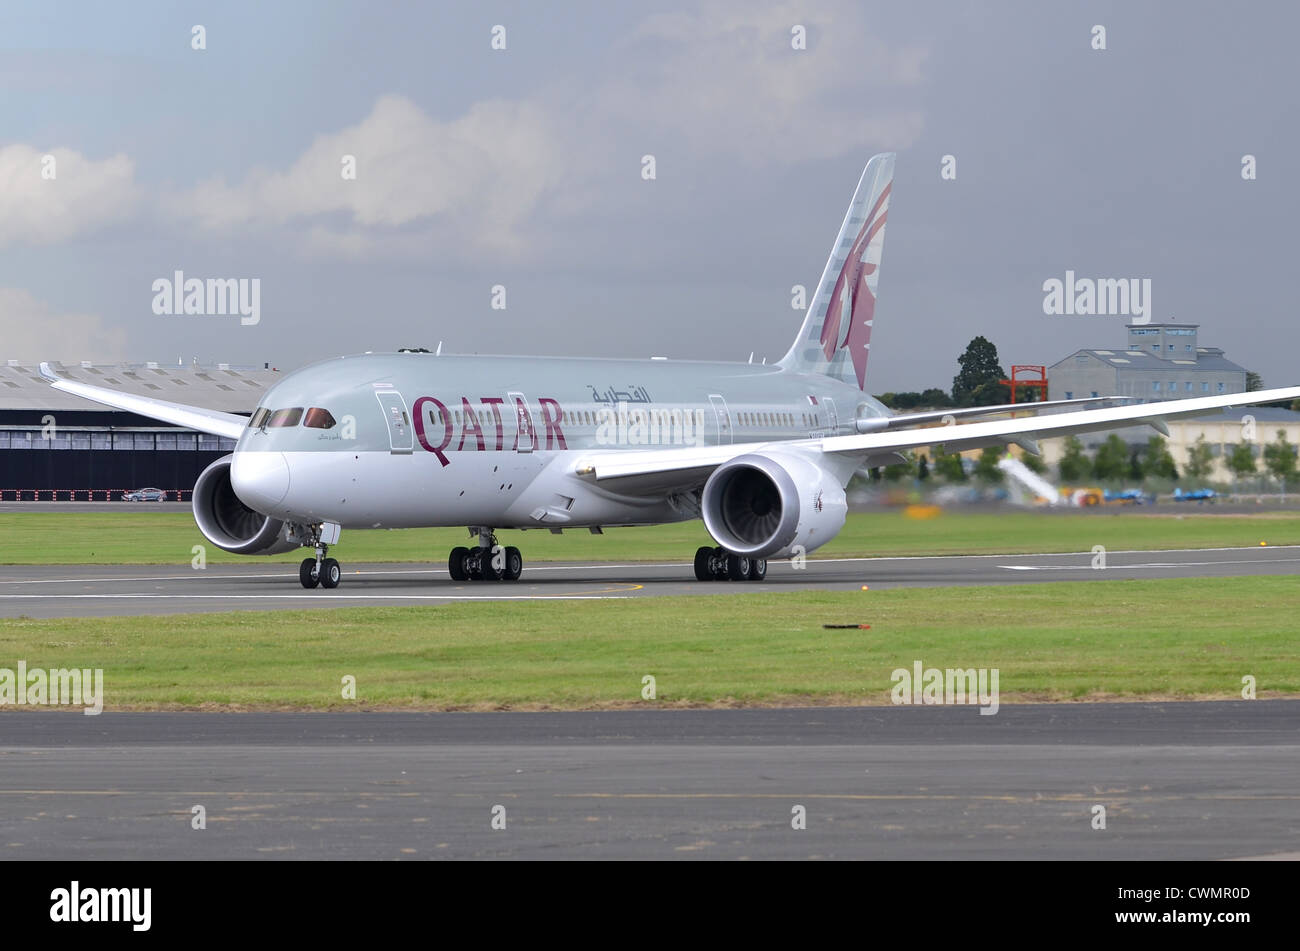 Boeing 787 Dreamliner in the colours of Qatar Airways begnning its take-off run at Farnborough International Airshow 2012 Stock Photo